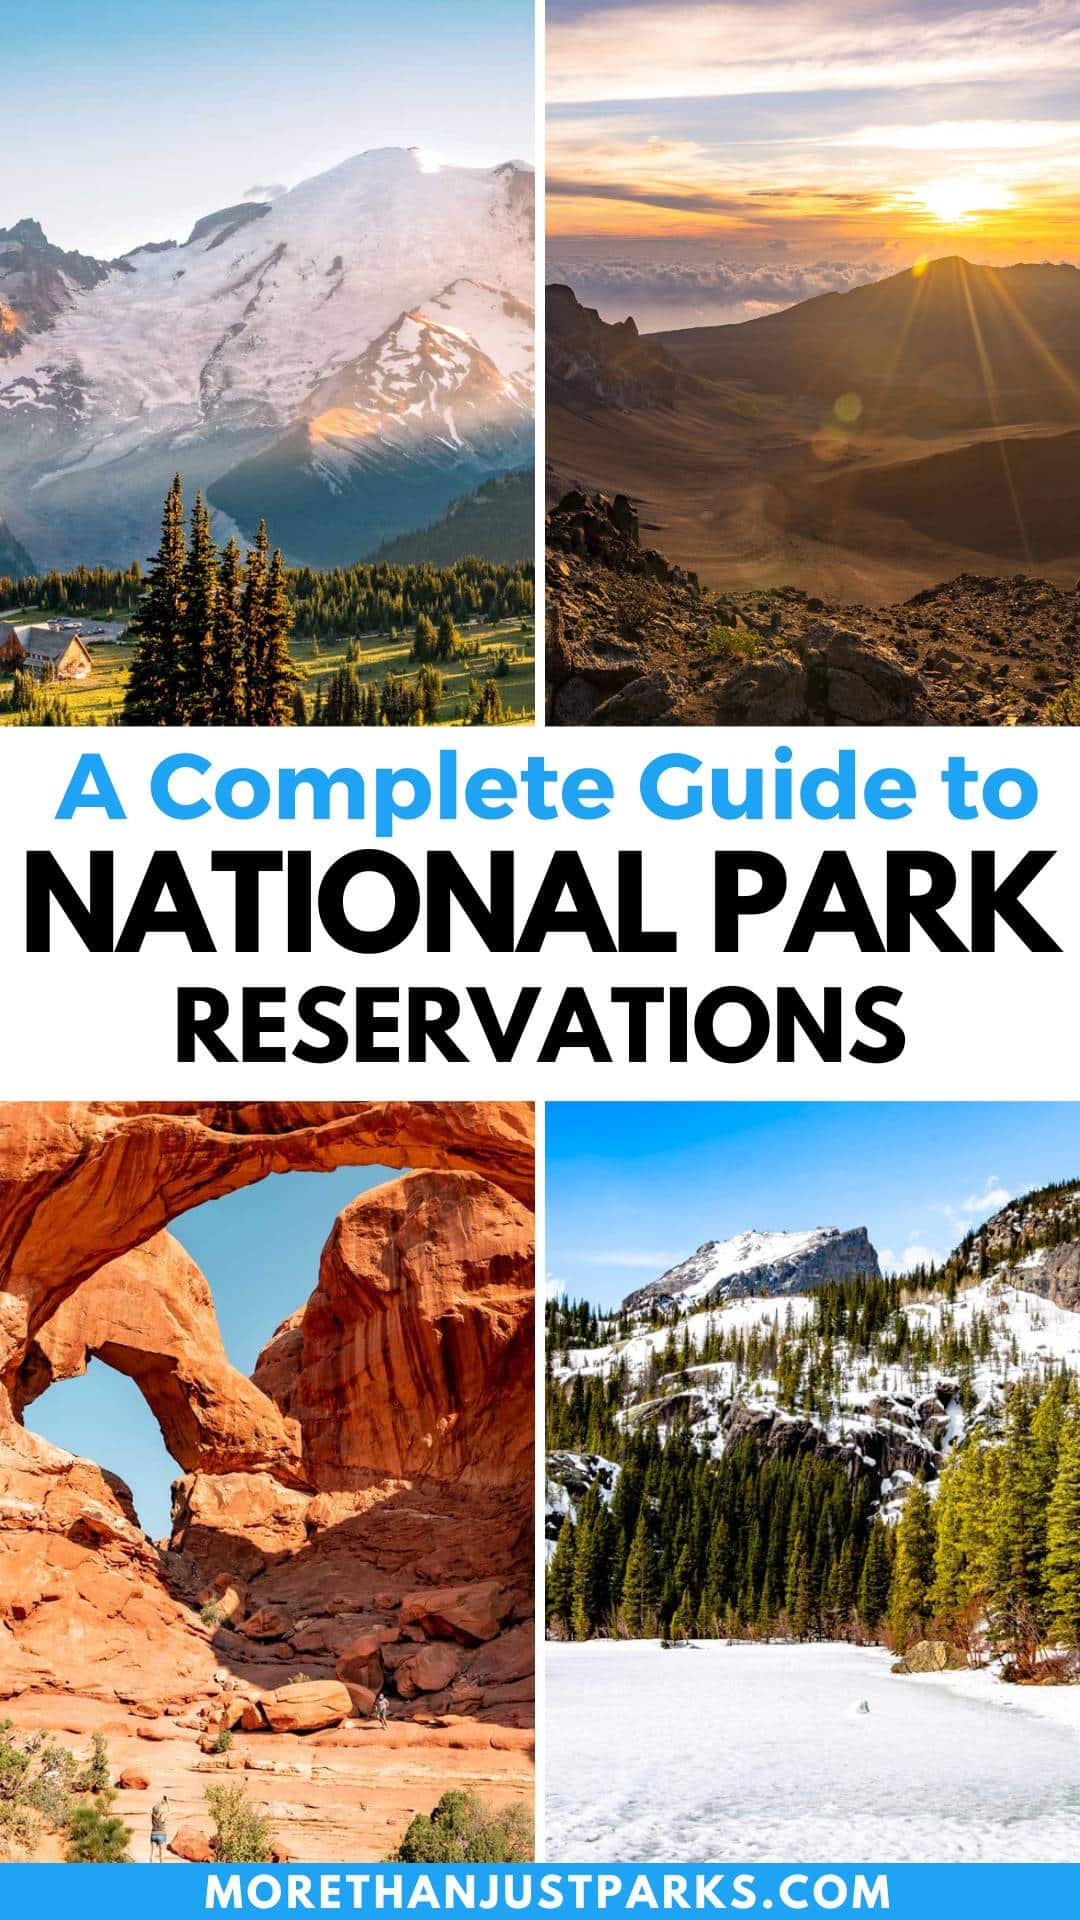 national parks that require reservations, national park reservations, list of national parks that have reservations